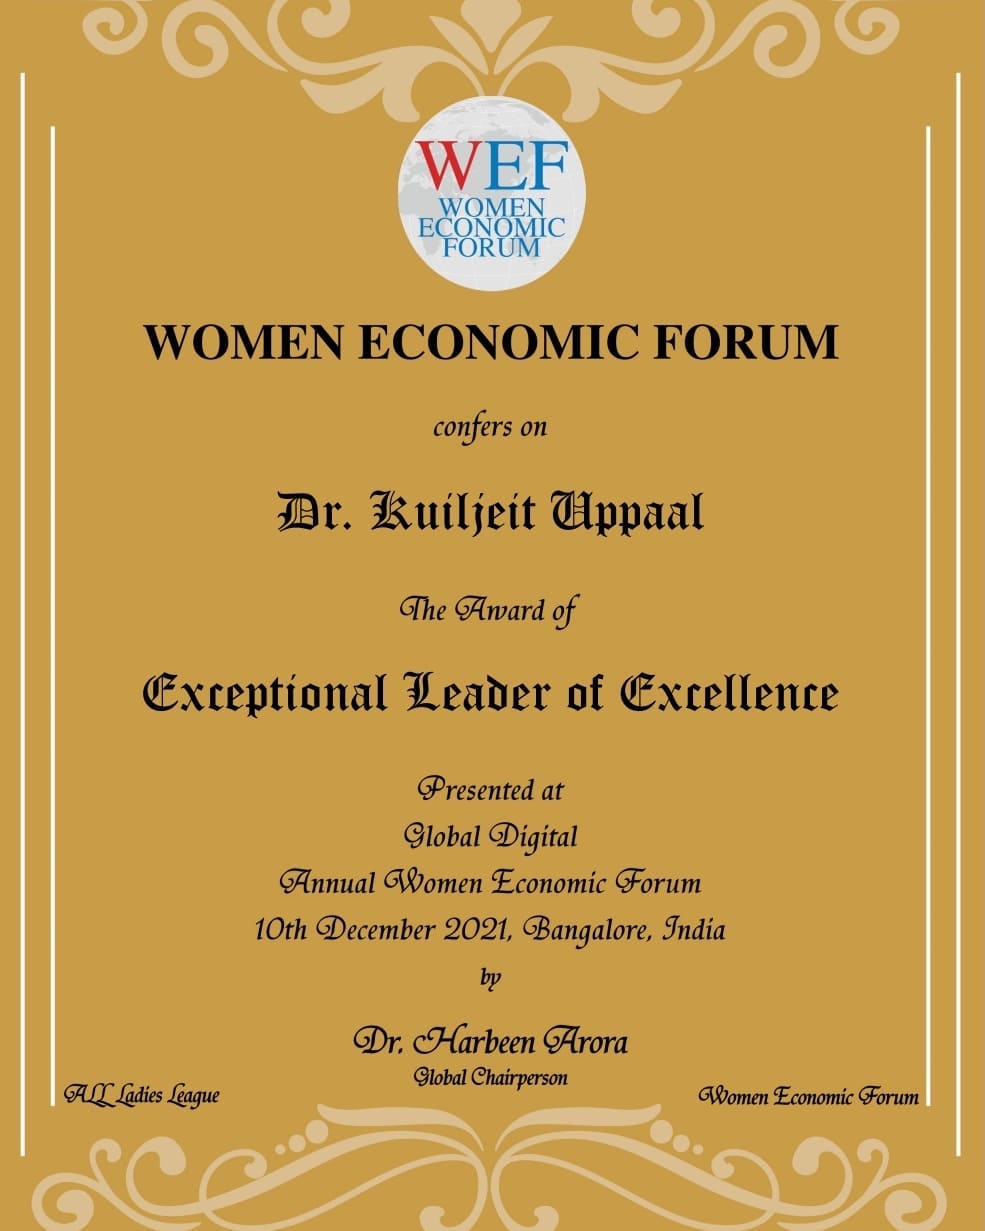 WEF Exceptional Leader of Excellence Award